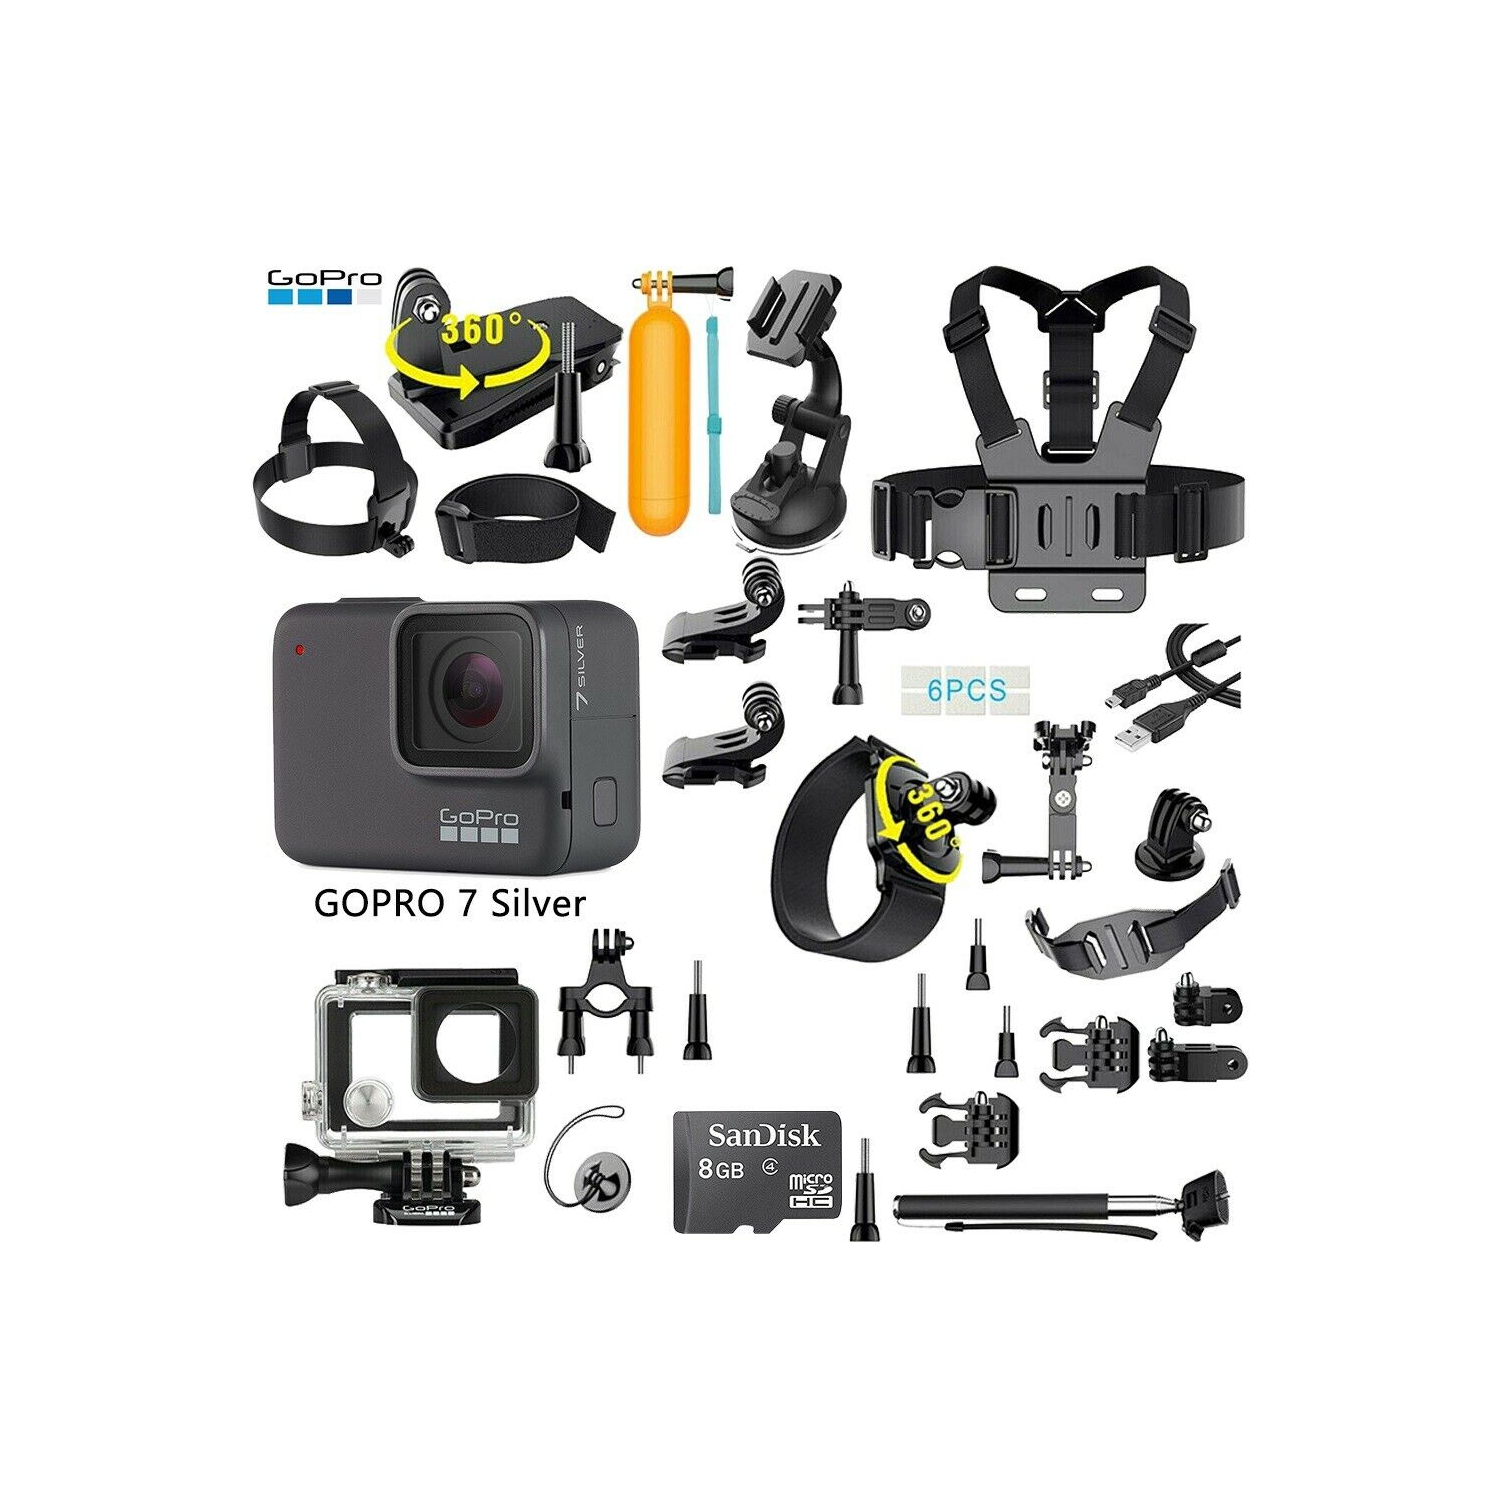 GoPro HERO7 Silver Waterproof Digital Action Camera with Touch Screen + 35-In-1 Action Camera Accessory Kit, Refurbished